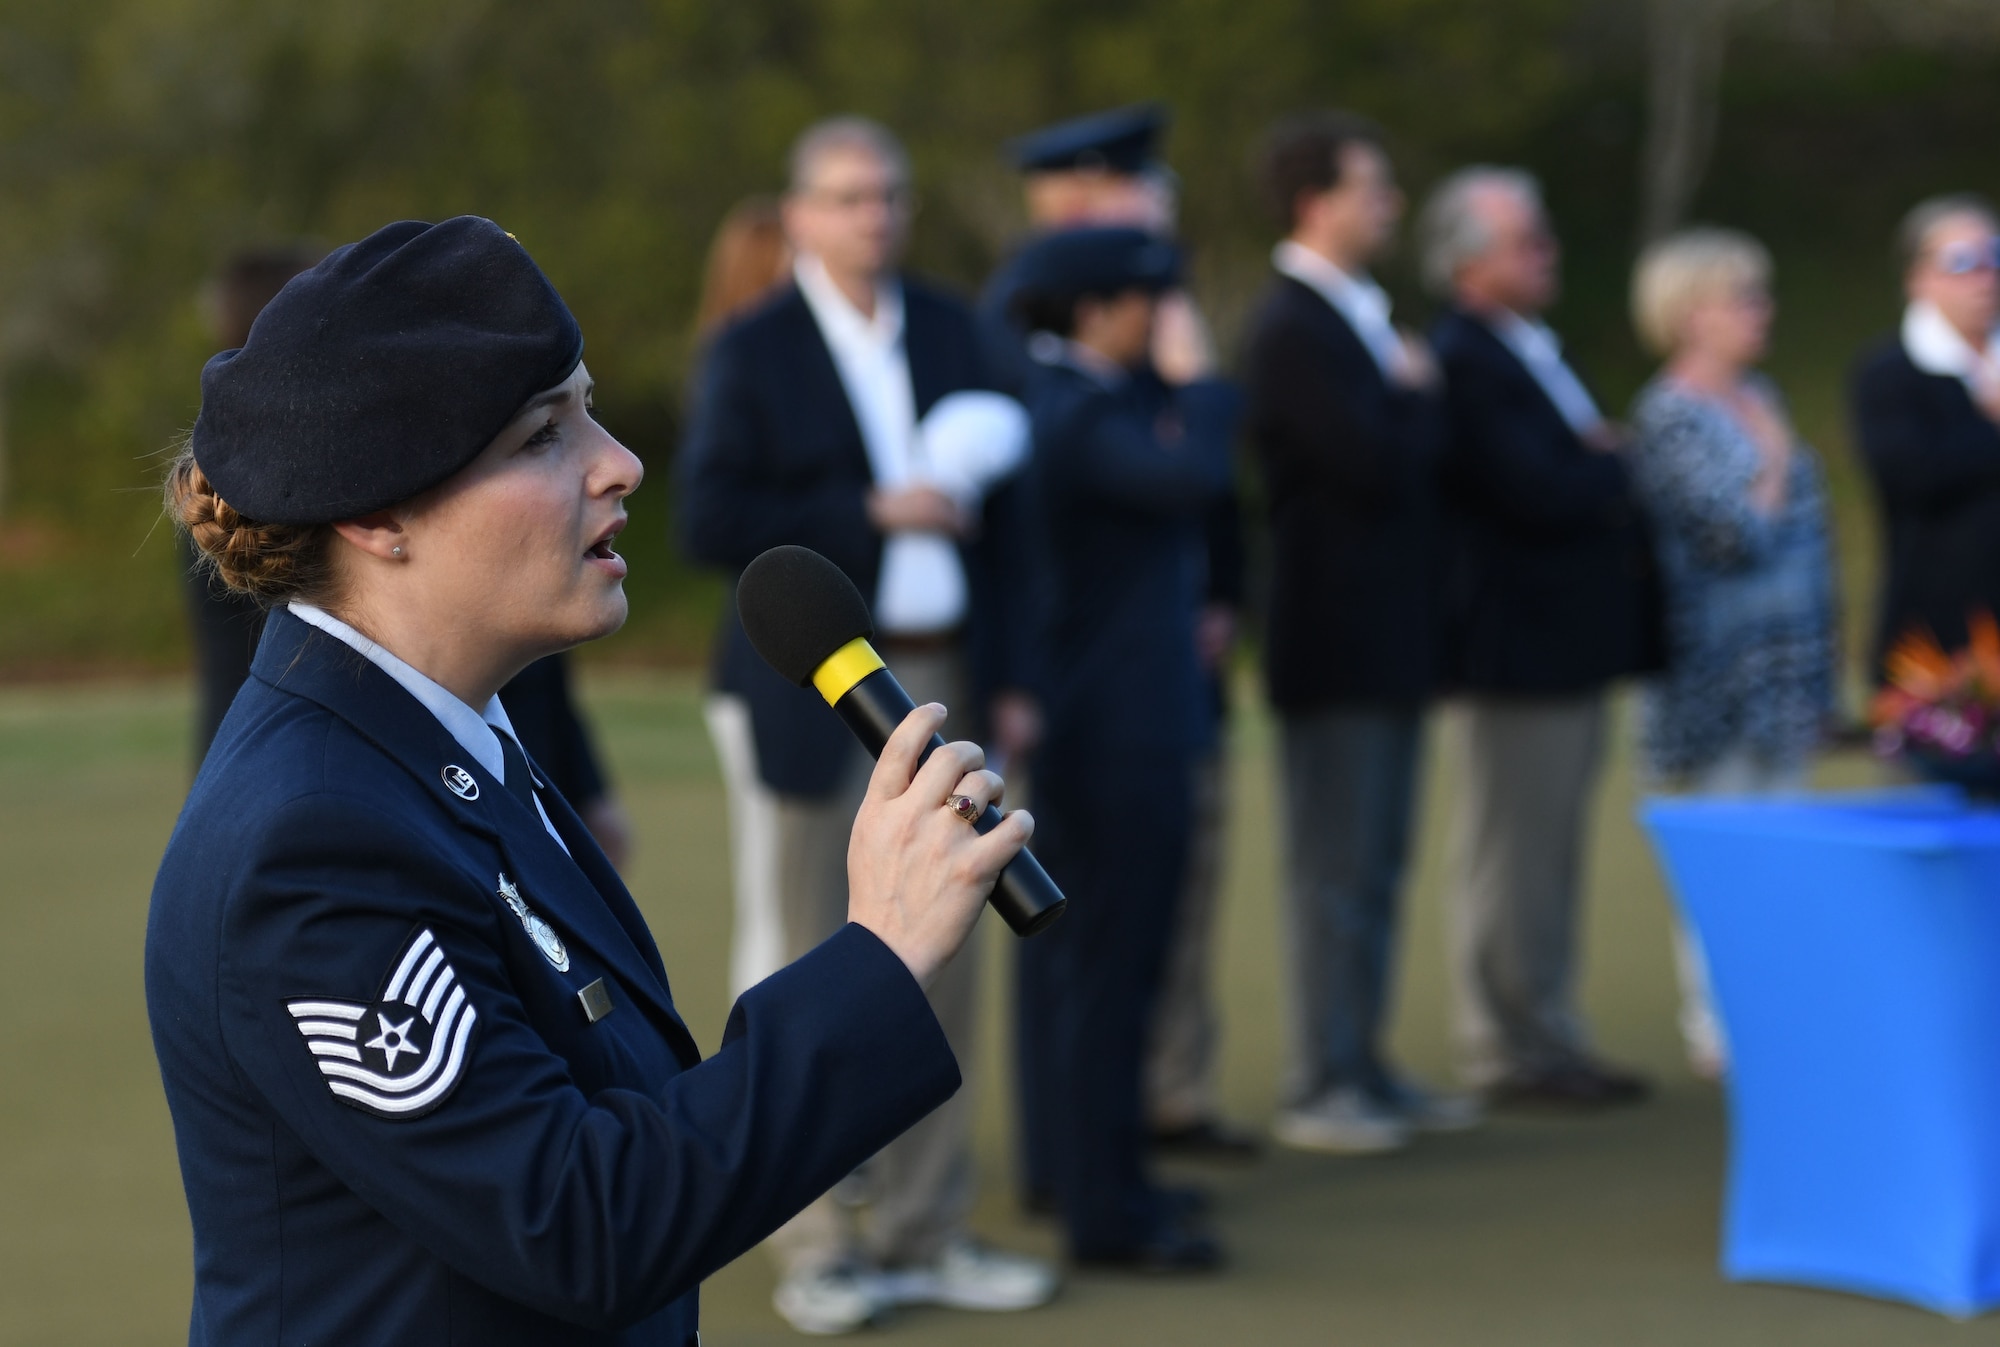 U.S. Air Force Tech. Sgt. Jennifer Watts, 81st Training Wing command chief executive assistant, during the Rapiscan Systems Classic Champions Tour at Fallen Oak Golf Club March 25, 2018, in Saucier, Mississippi. Keesler personnel performed the national anthem and presented the colors during the closing ceremony of the three-day event. (U.S. Air Force photo by Kemberly Groue)